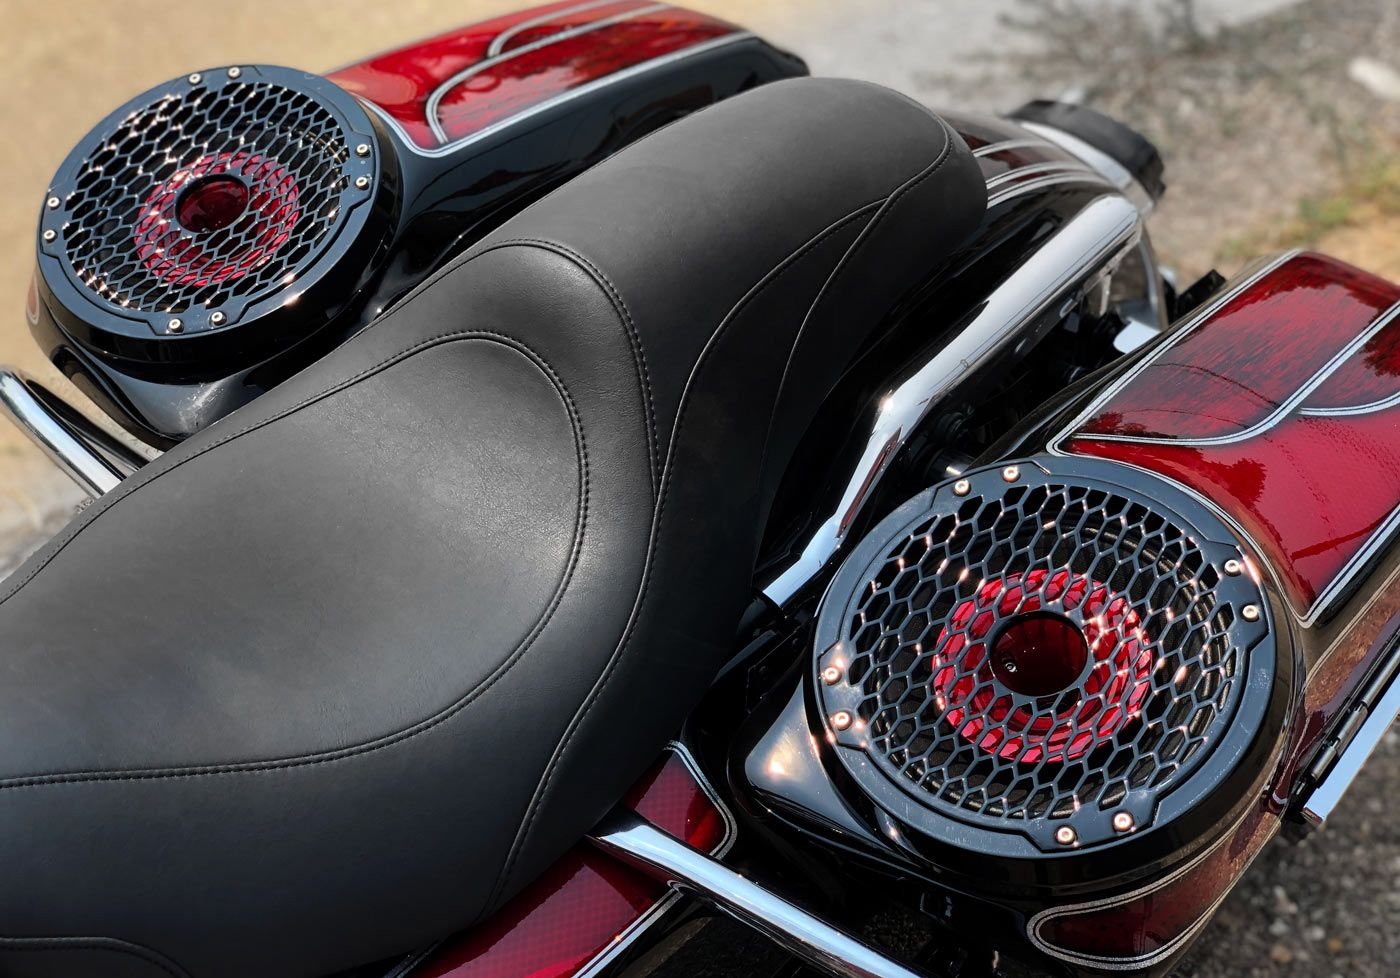 superior motorcycle audio with VO-W speakers with horn in saddle bags